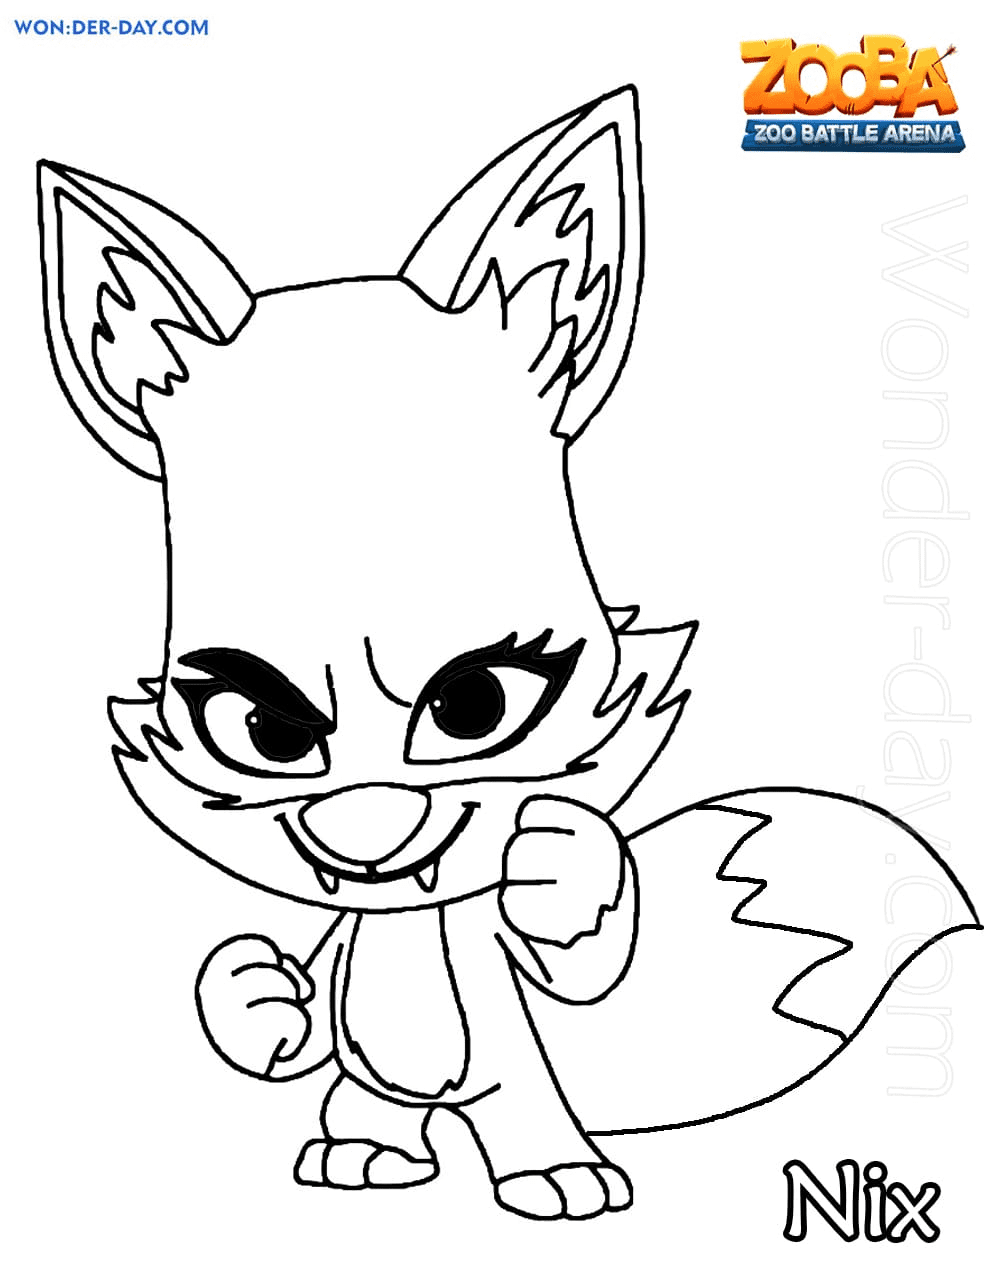 Nix Zooba Coloring Pages